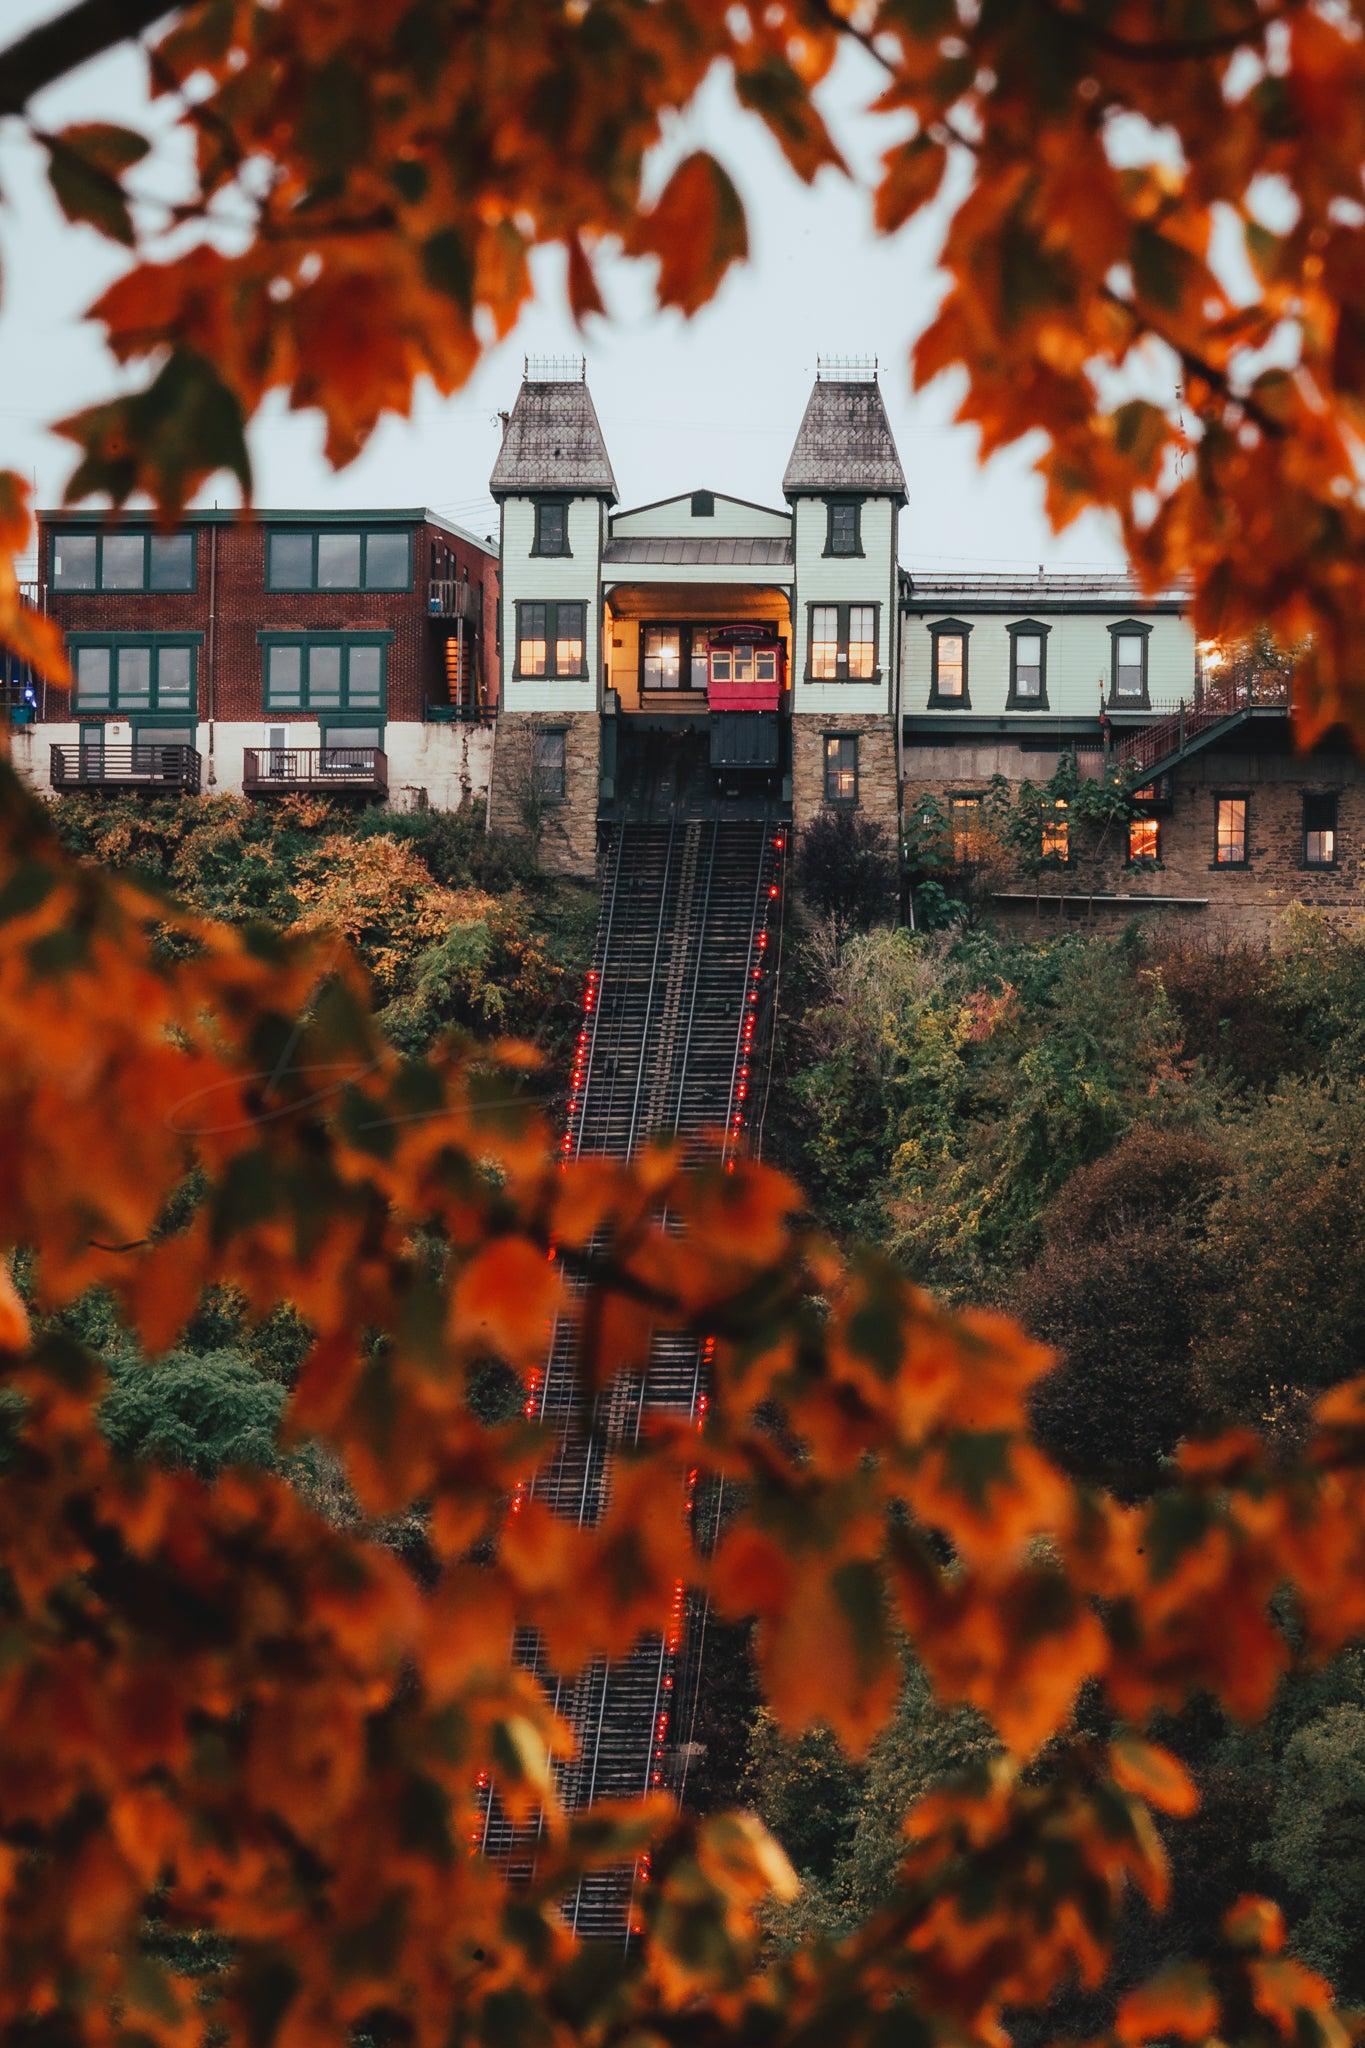 Duquesne Incline Framed by Colorful Fall Leaves